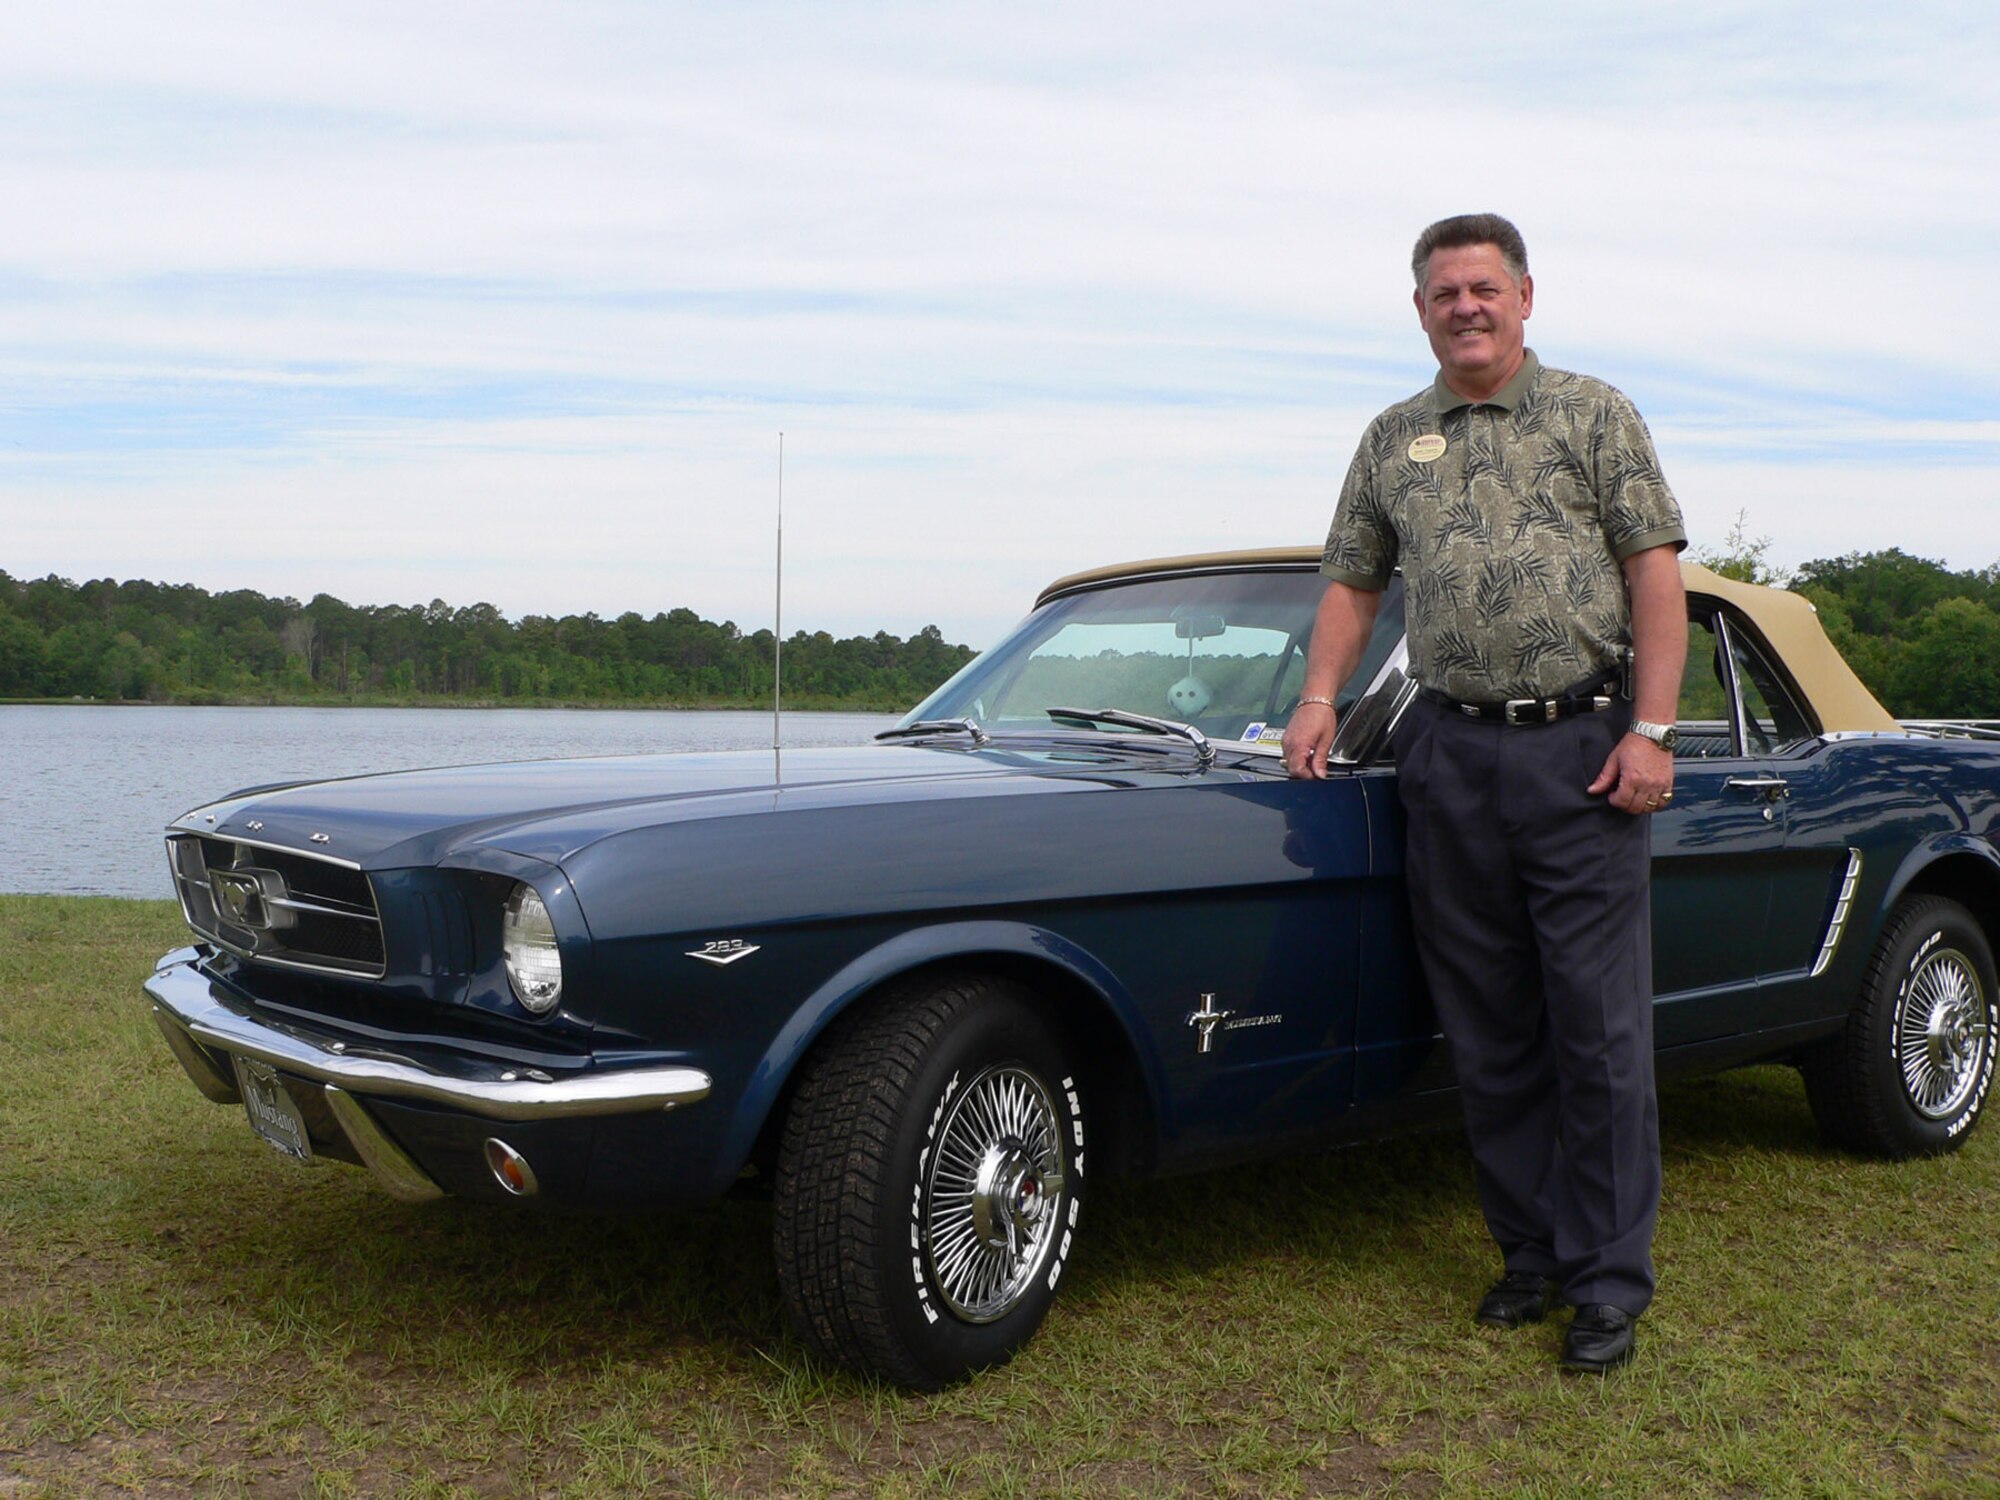 MOODY AIR FORCE BASE, Ga. -- Buddy Chapman, 347th Services Squadron here, shows off his 1965 Ford Mustang he bought after injuring himself during a rodeo in Germany and finding out he could no longer ride horses. Mr. Chapman, a retired chief master sergeant, has spent the last couple years rebuilding his classic car. (U.S. Air Force photo by Senior Airman S.I. Fielder)